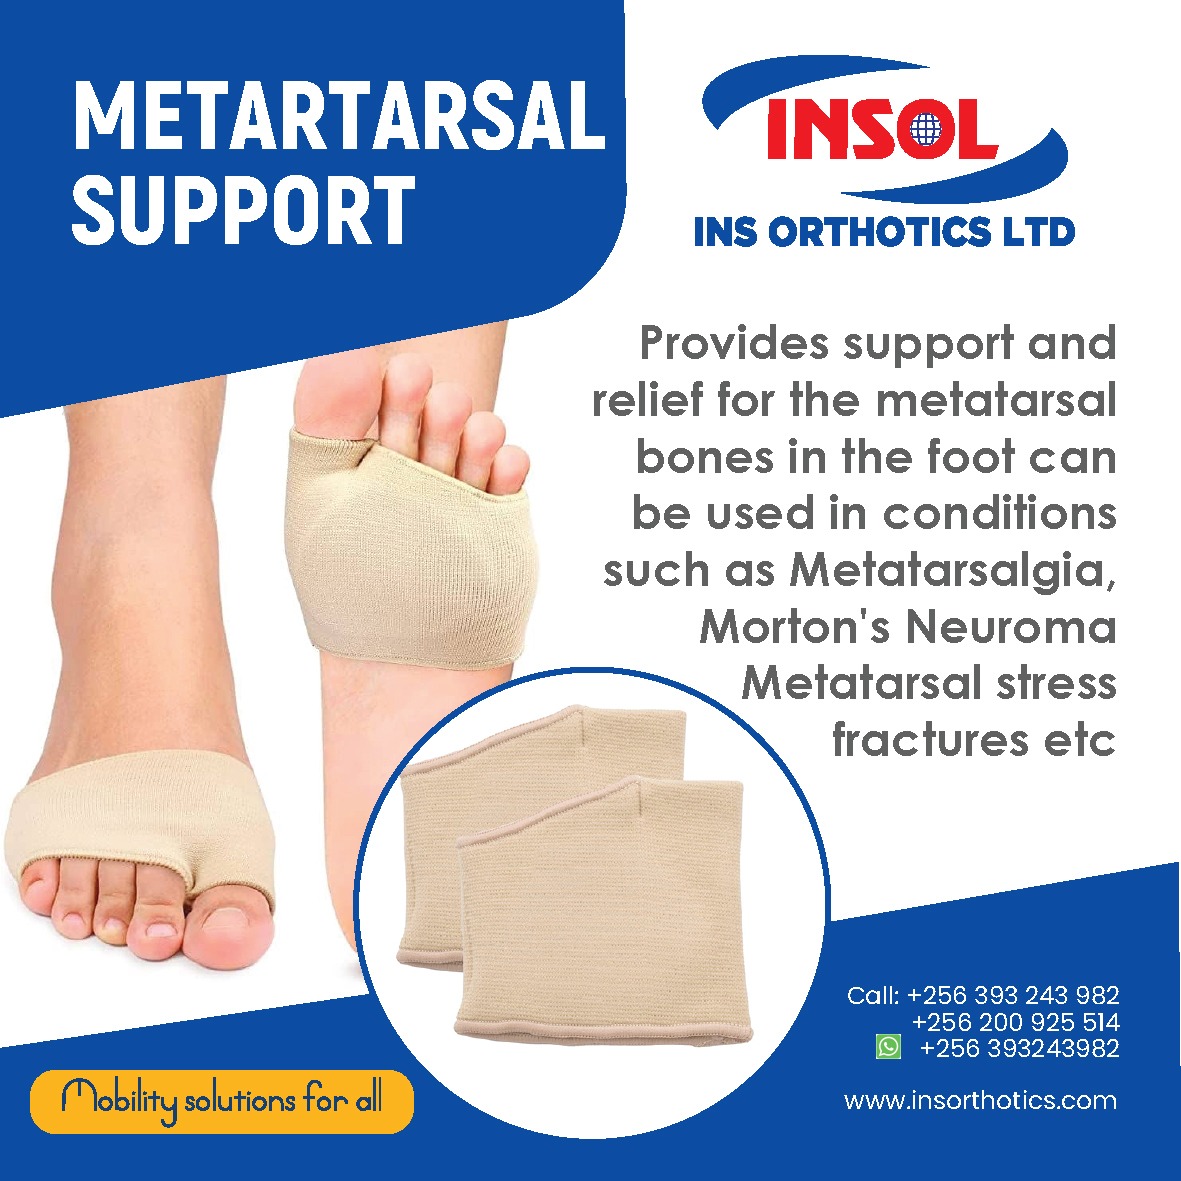 Metatarsal pads are made of cushioning materials. They work by redistributing pressure away from the metatarsal heads, which helps alleviate pain and discomfort. The pads act as a cushioning barrier, absorbing shock and reducing friction between the metatarsals and the ground.